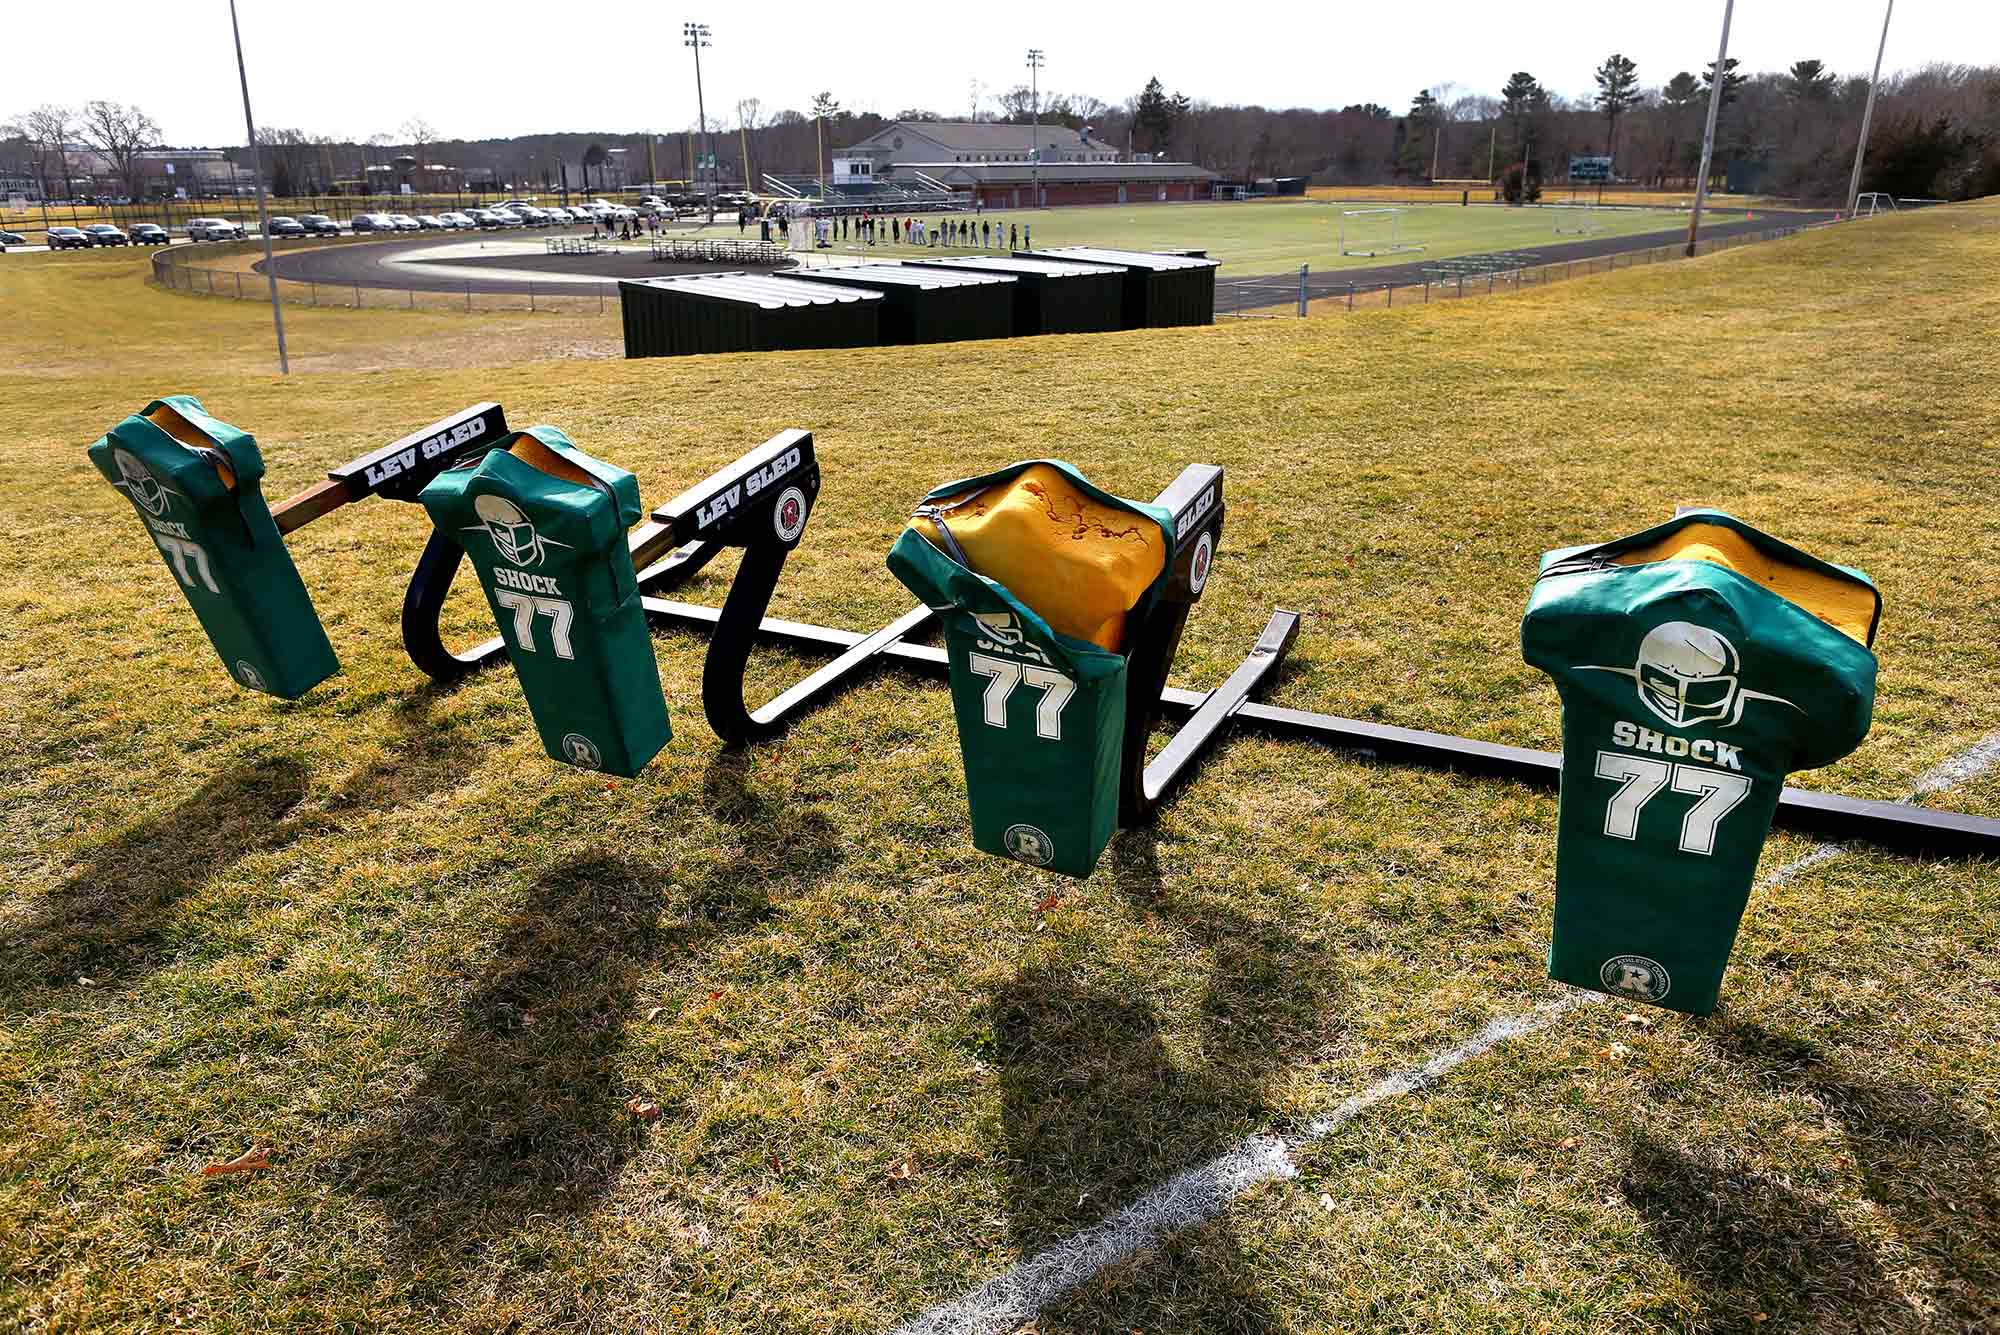 Photo of a football push sled with green number 77 jerseys on it in a field on Duxbury high school's grounds.